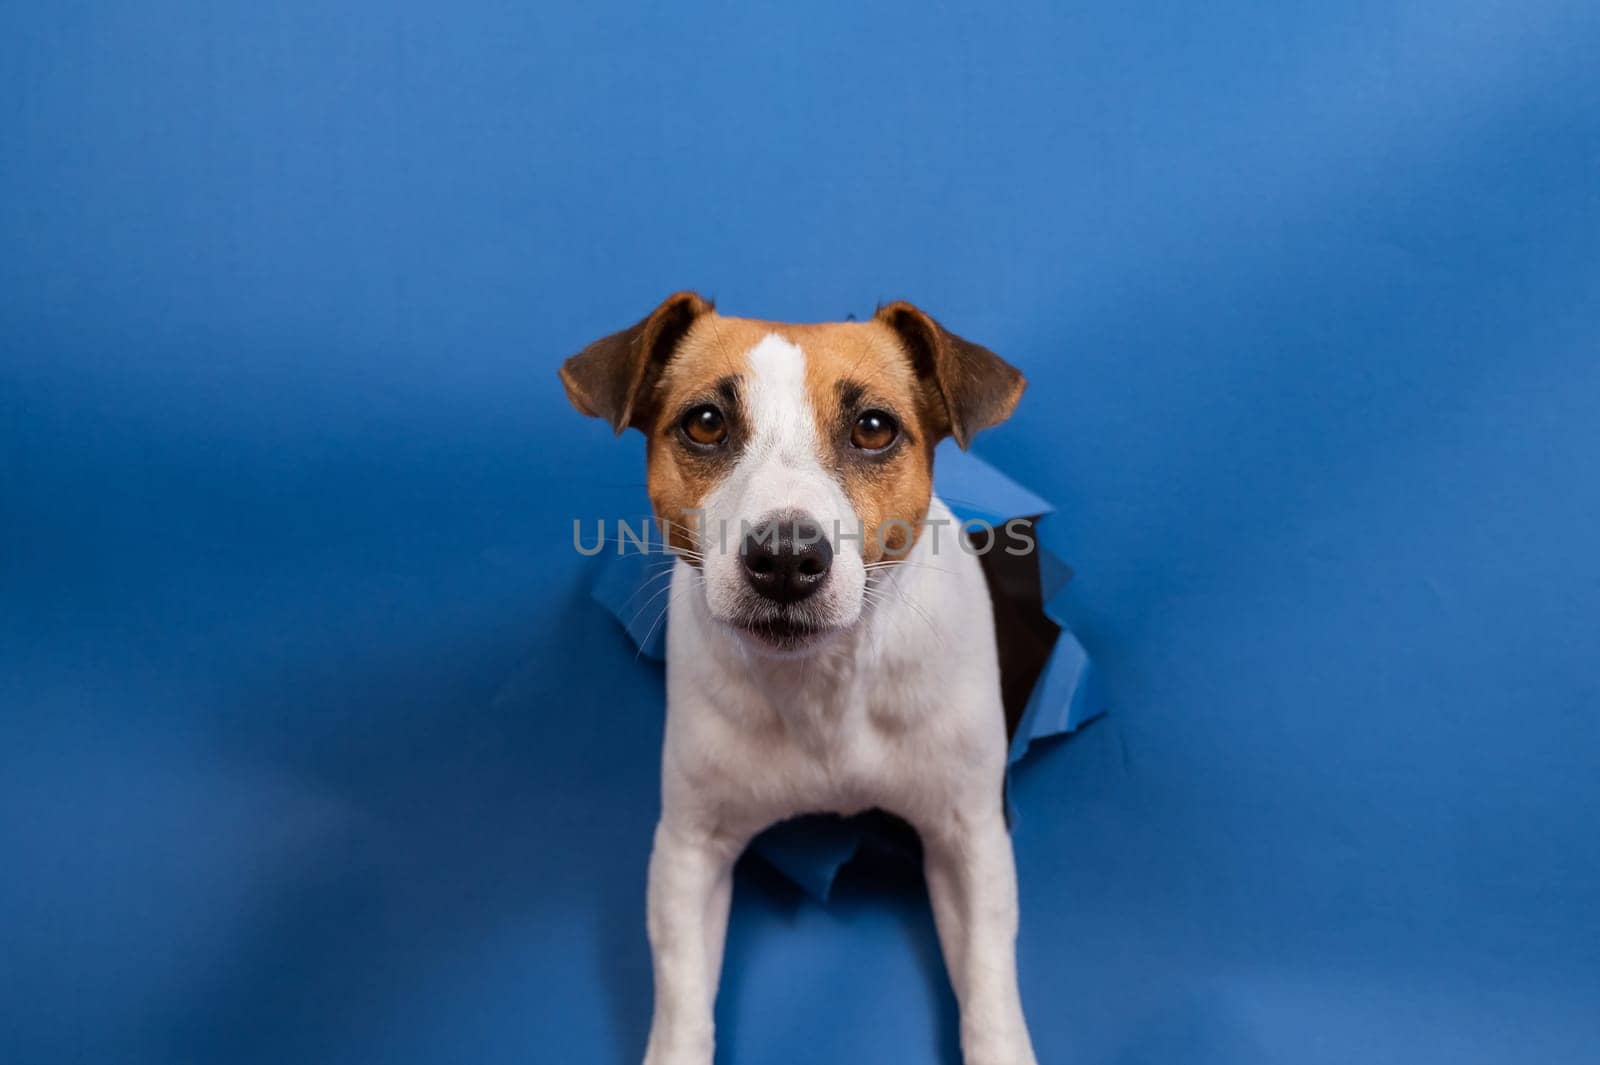 Funny dog jack russell terrier climbs out of a paper blue background breaking a hole in it